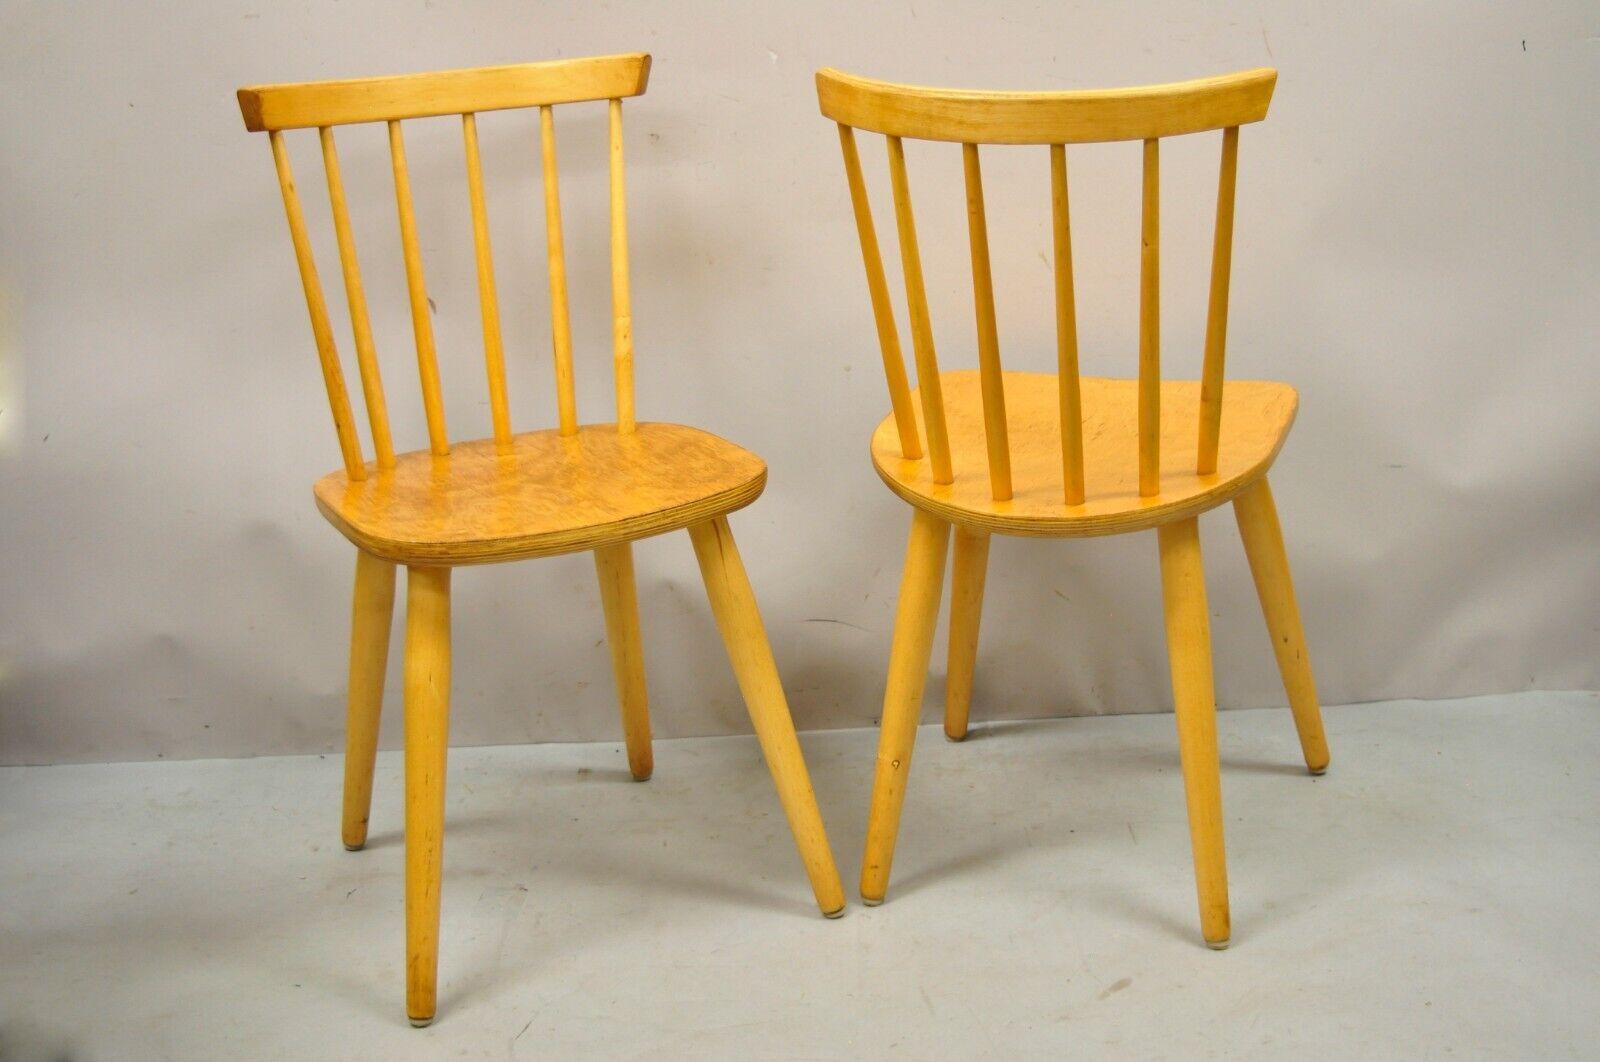 Vintage Mid-Century Modern Spindle Bush Birch Maple Side Chairs, a Pair In Good Condition For Sale In Philadelphia, PA